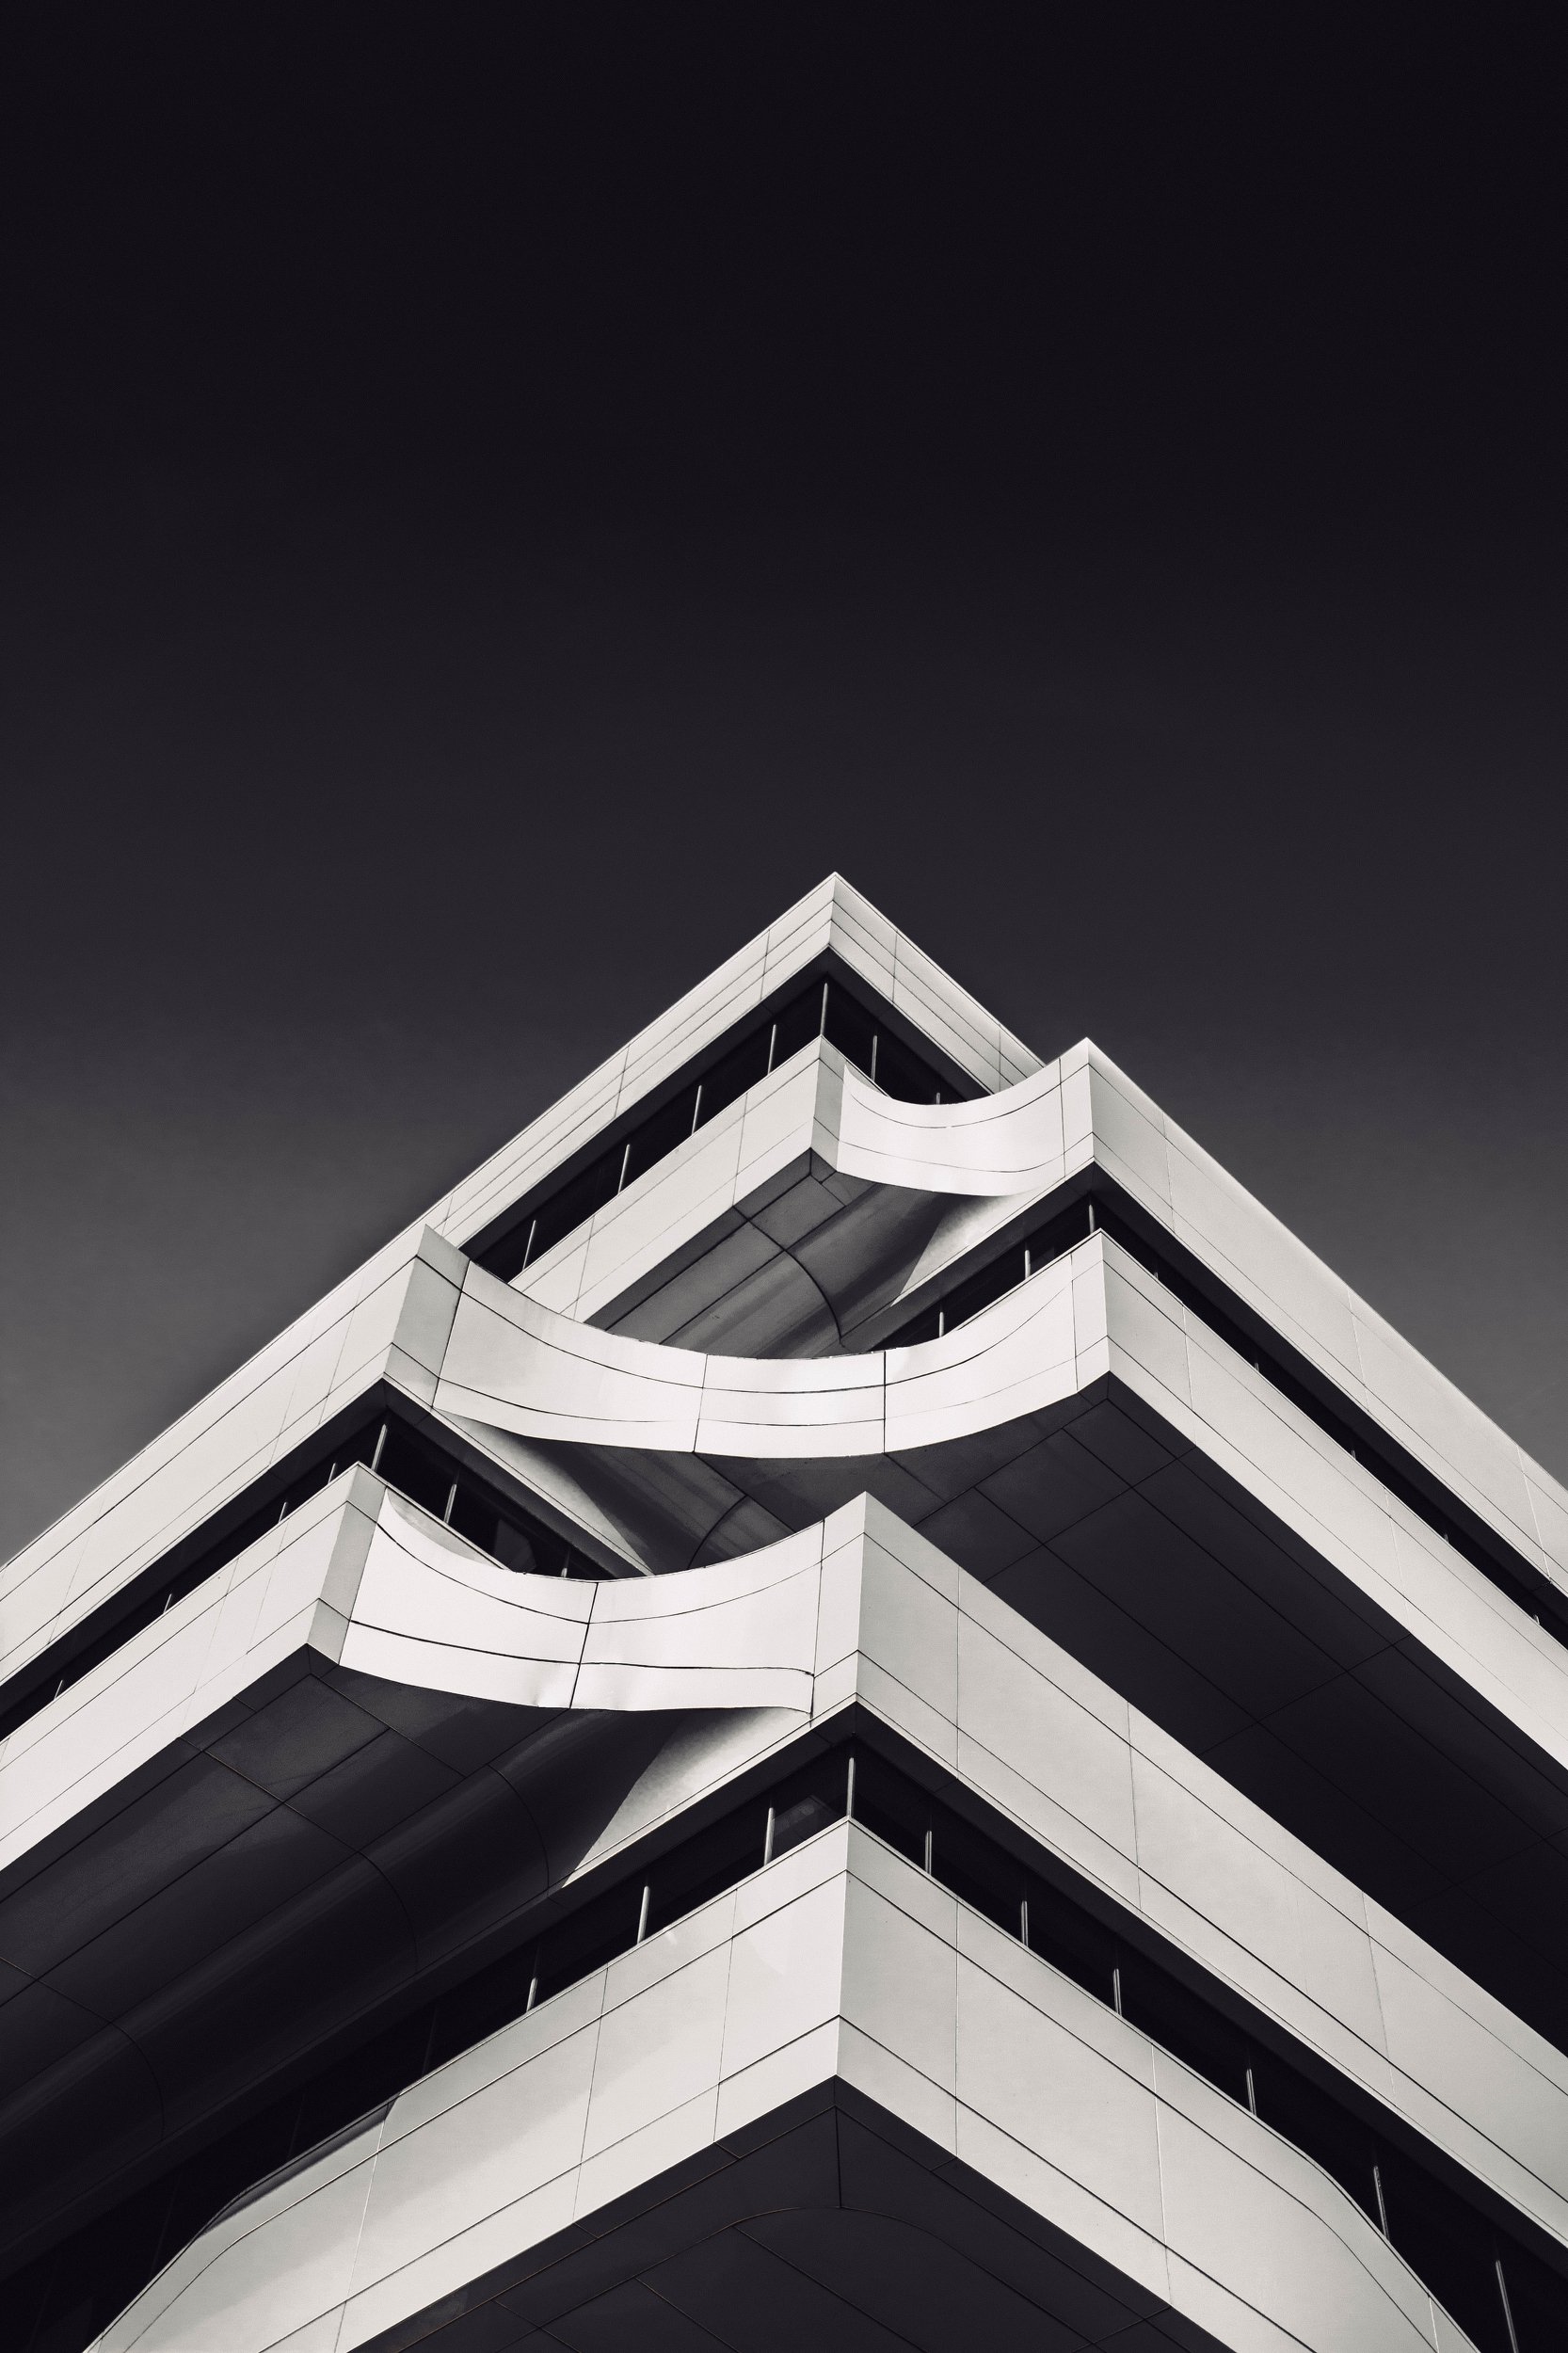 dominion, tower, architecture, black, white, geometry, line, moscow, russia, Сергей Гладков